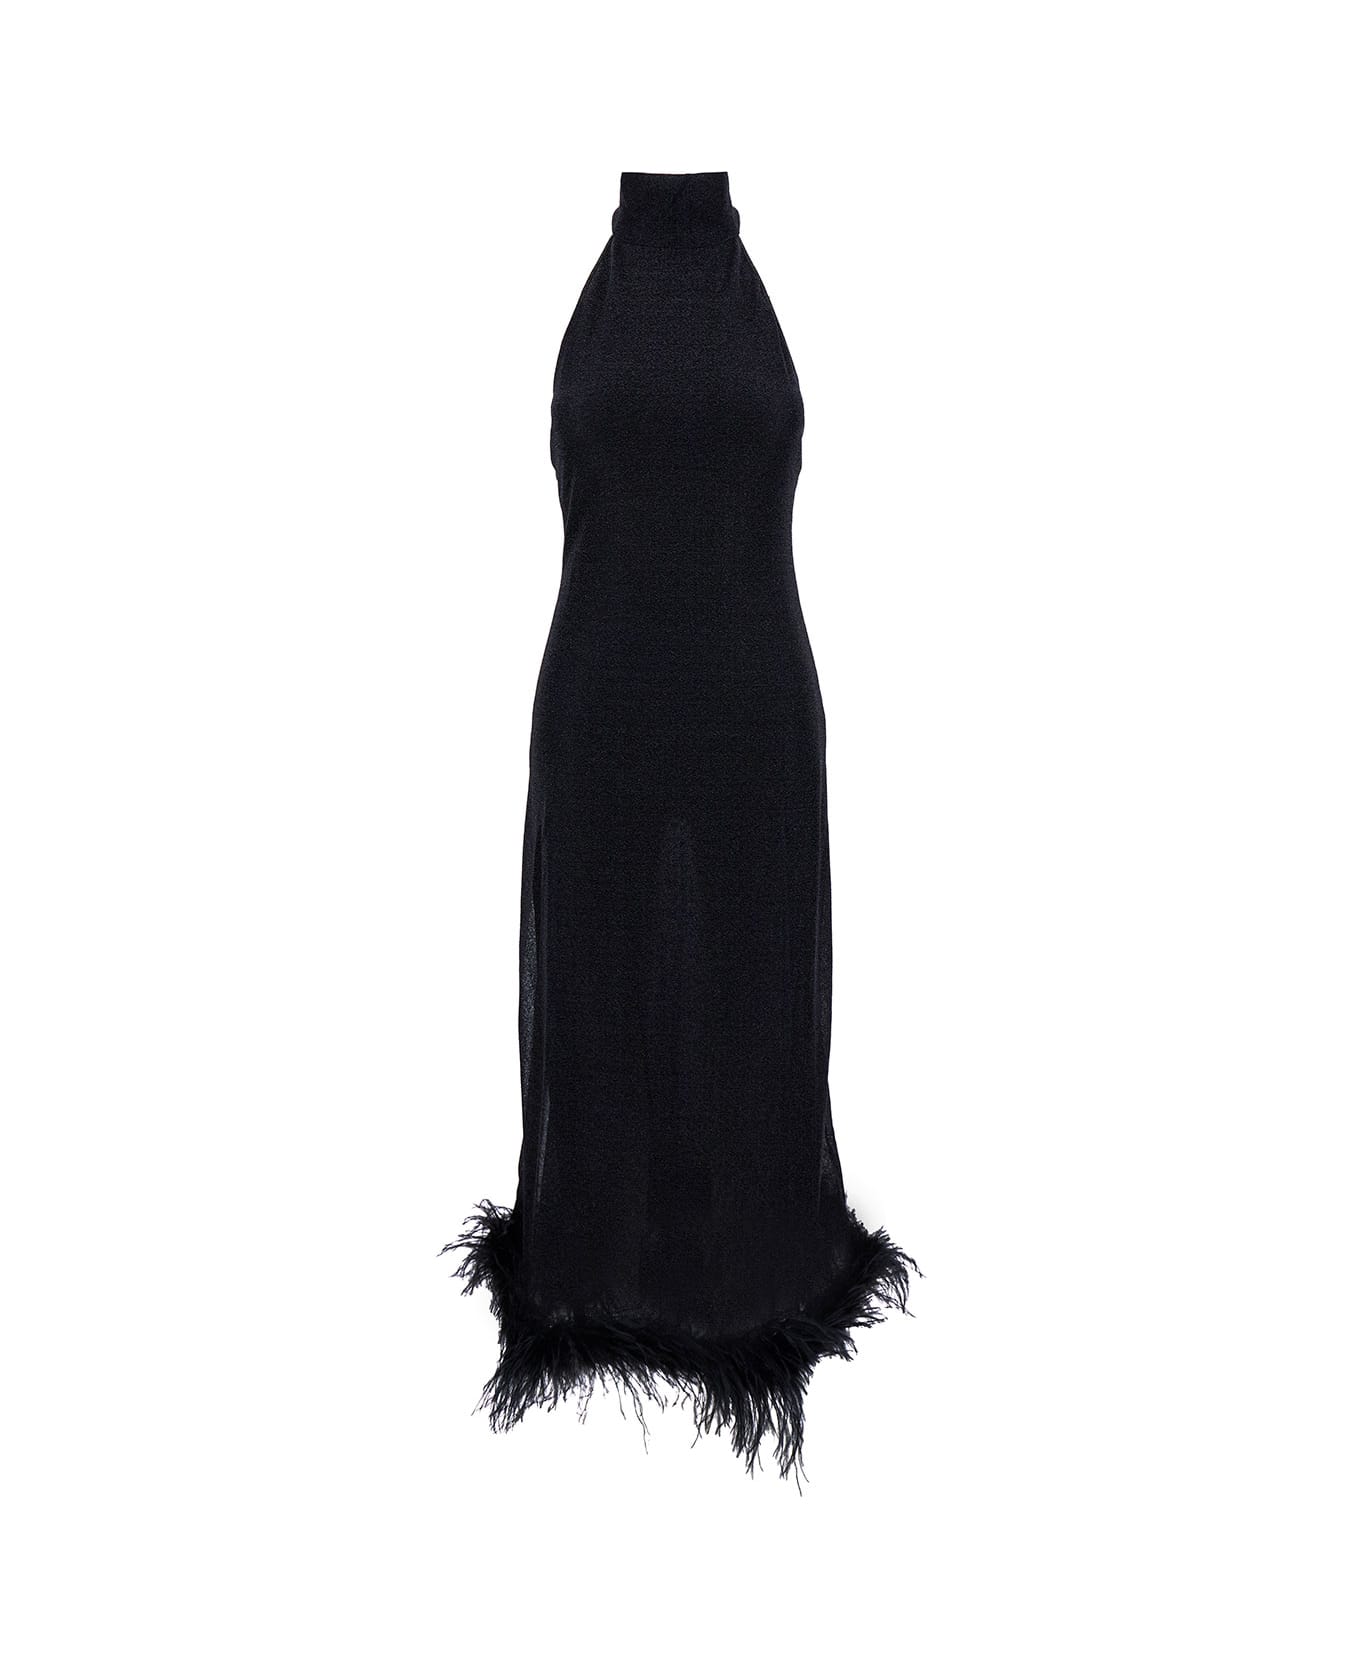 Oseree Long Black Dress With High Neck And Feathers In Lurex Woman - Black ワンピース＆ドレス